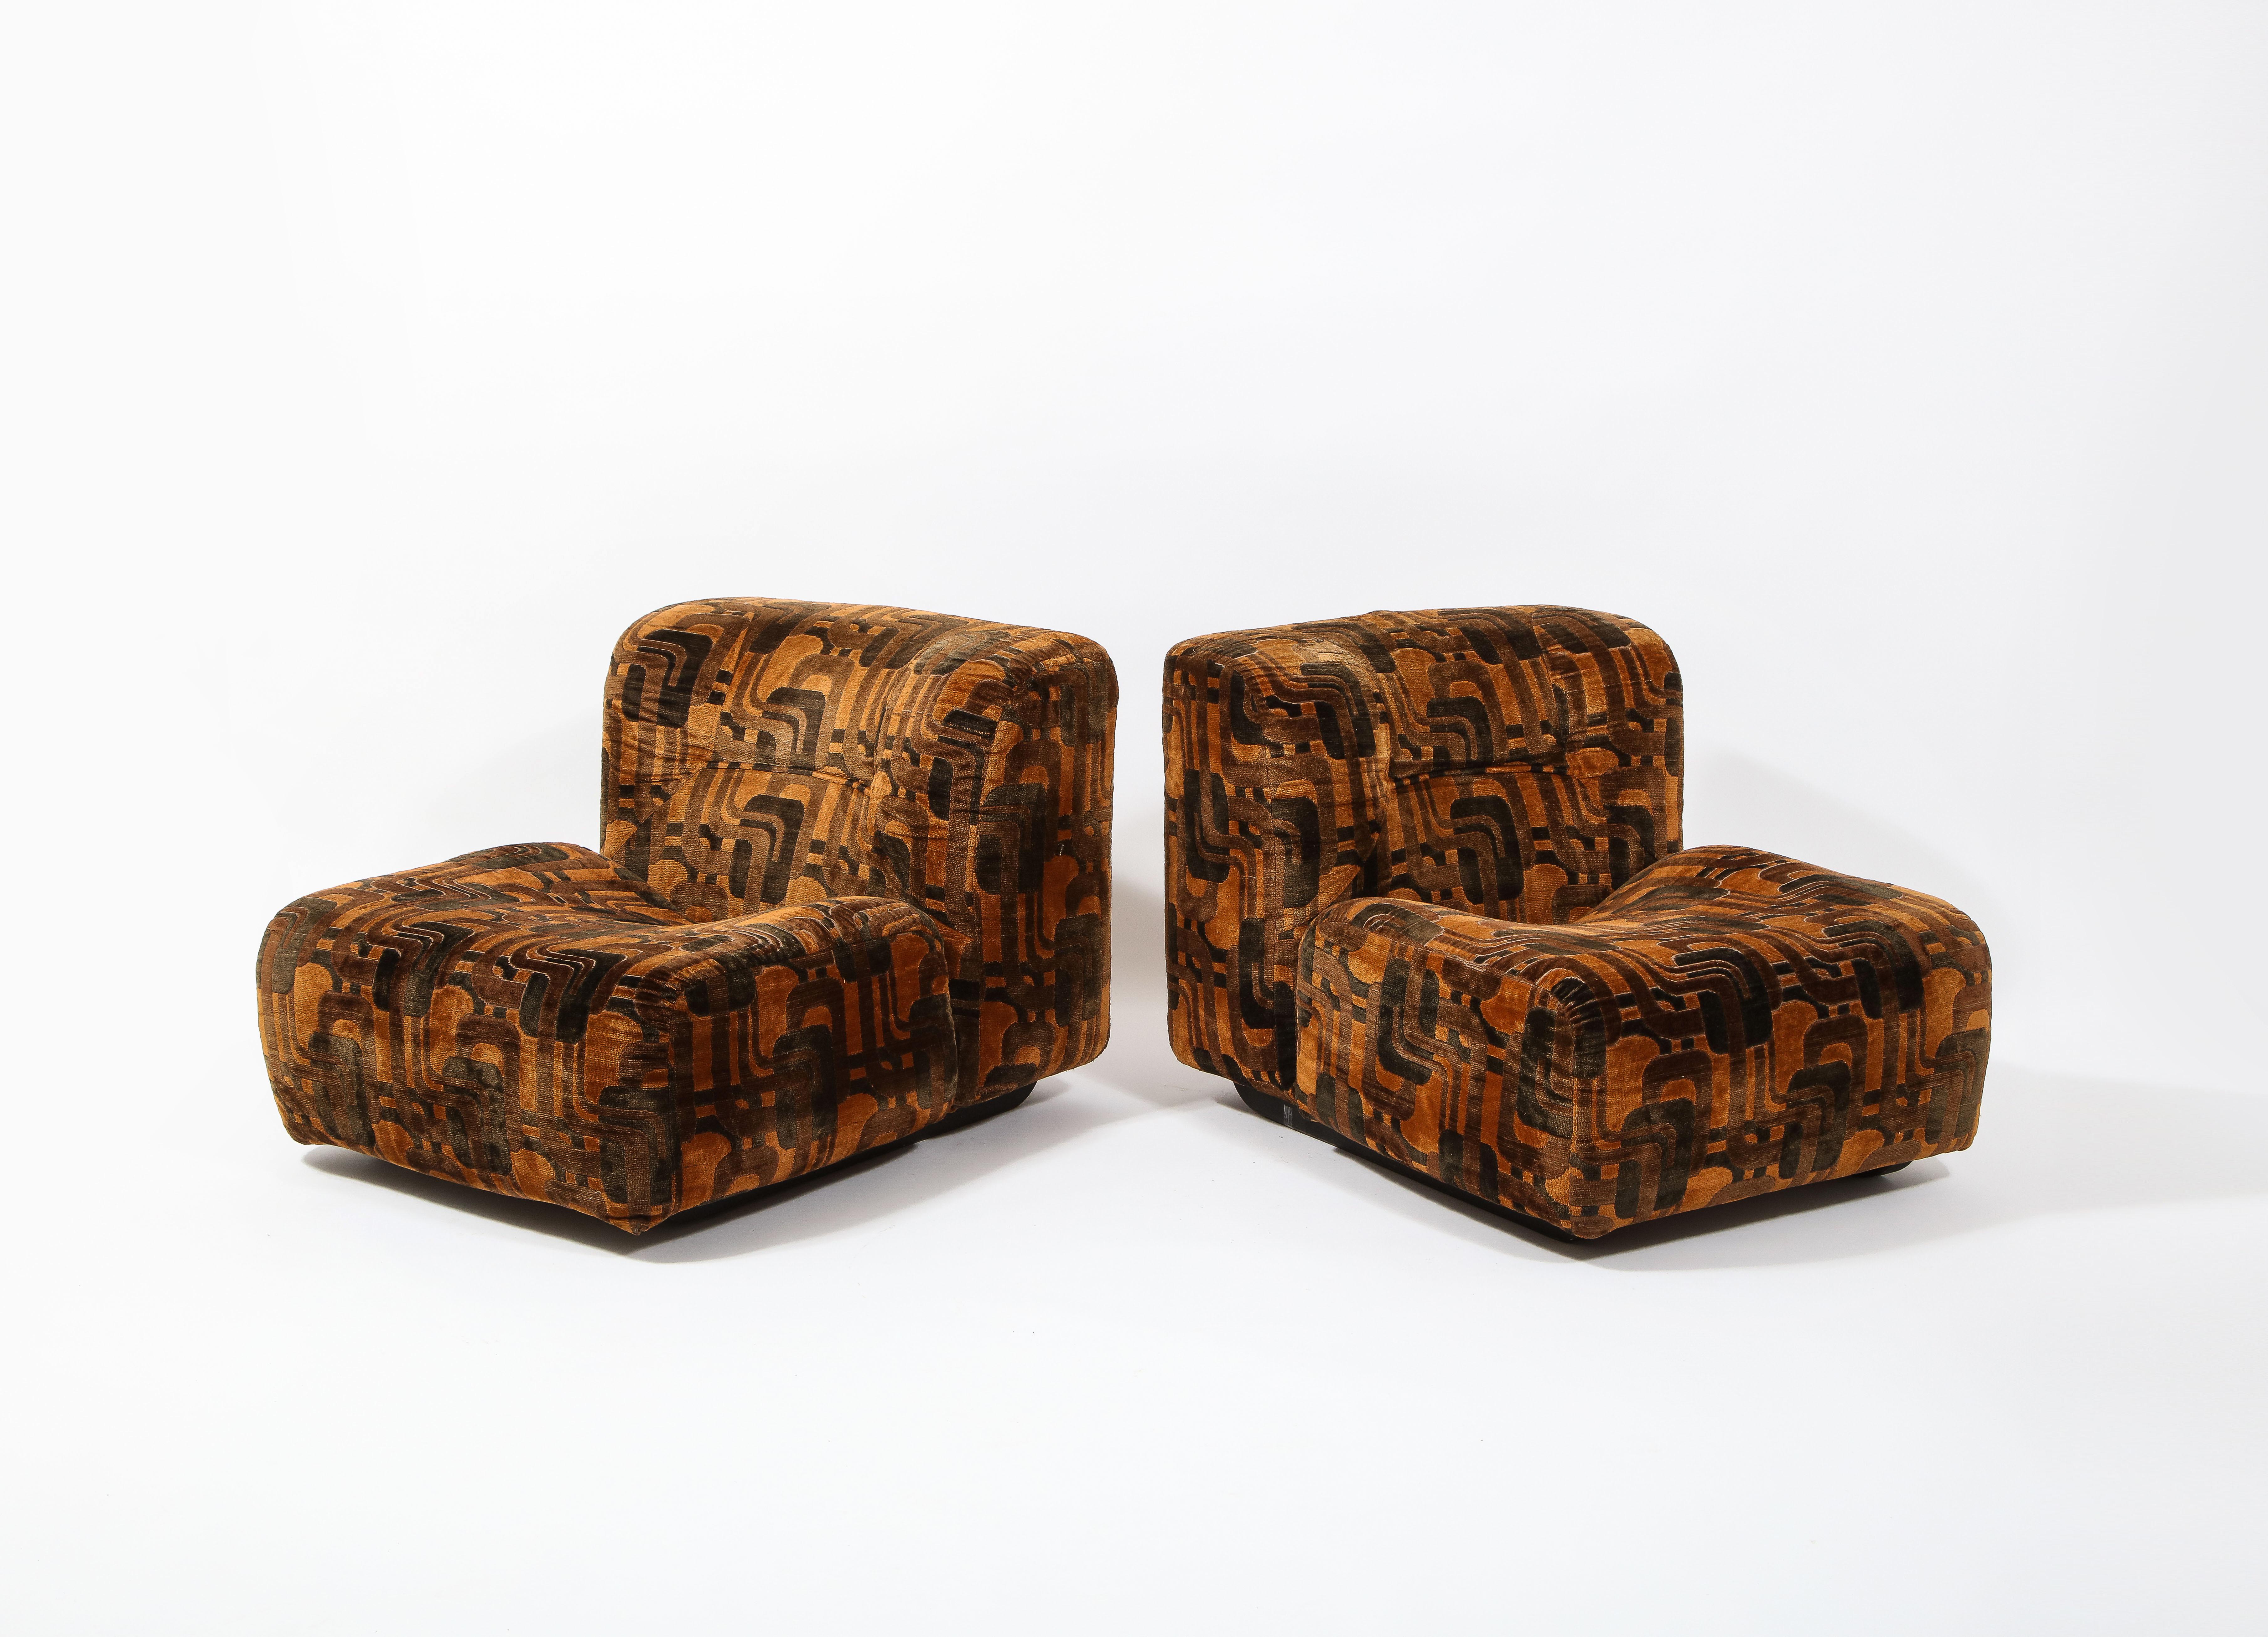 Fabric Tito Agnoli Pair of Slipper Chairs, Italy 1960's For Sale